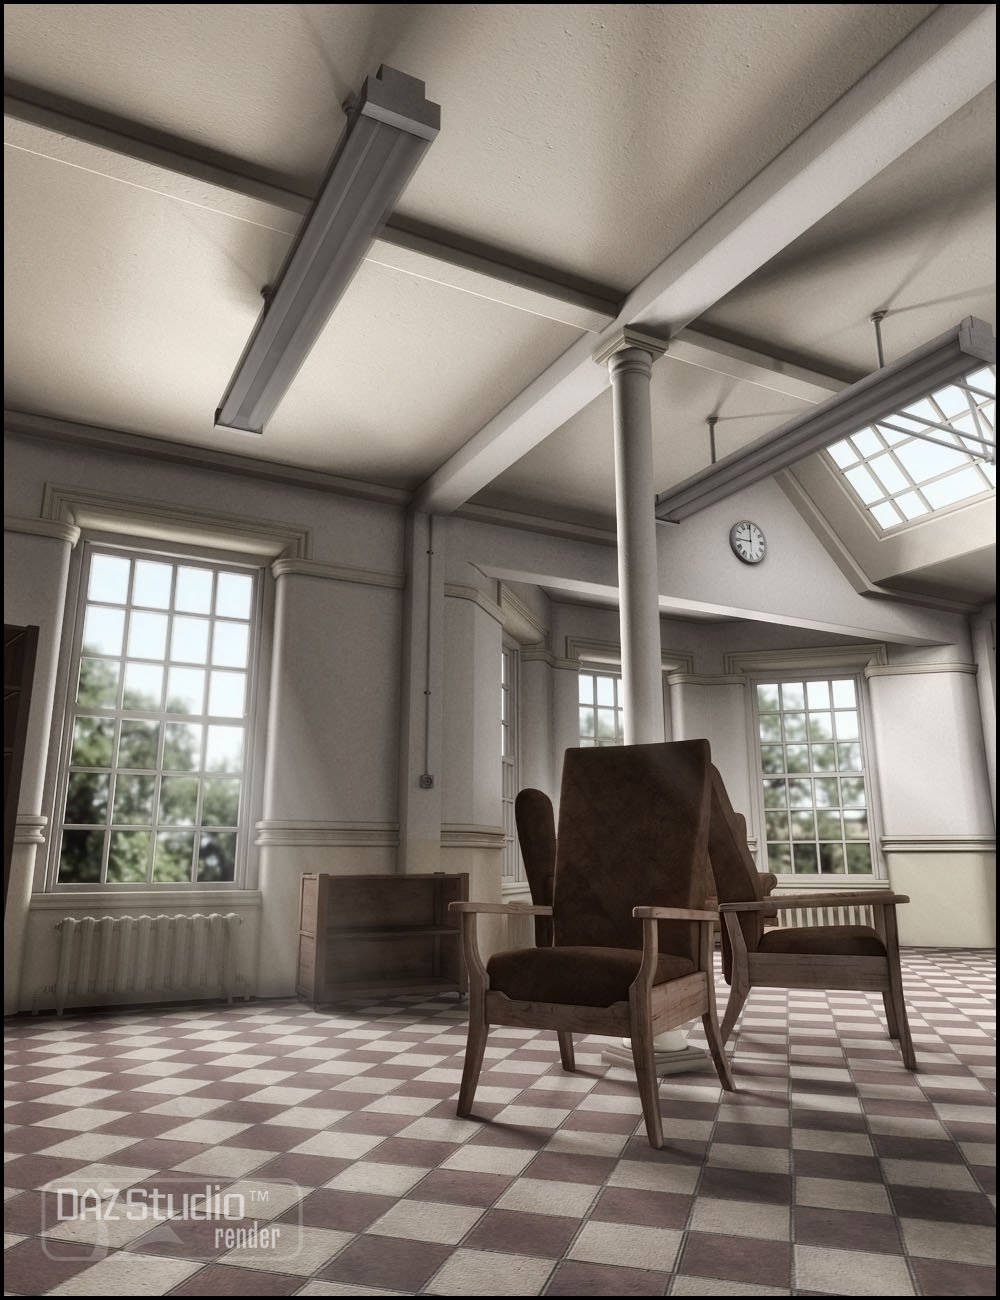 West Park Day Room Clinical by: Jack Tomalin, 3D Models by Daz 3D